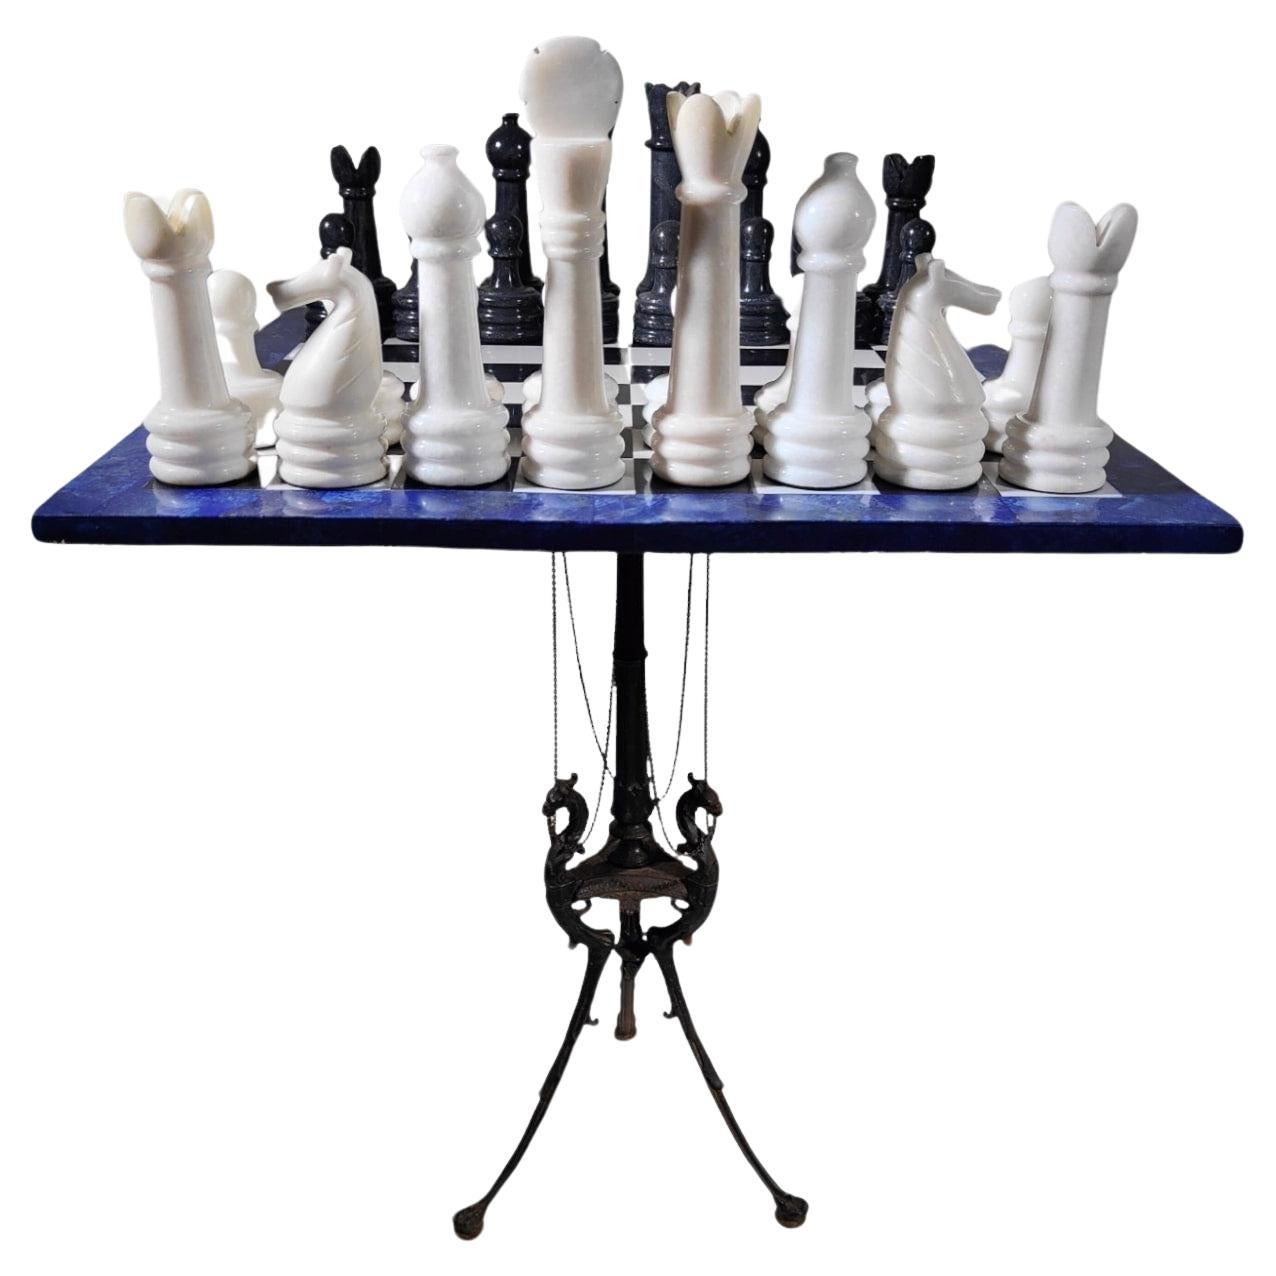 Italian Chess Table from the 1950s - Lapis Lazuli, Marble, and Dragon-Shaped  For Sale